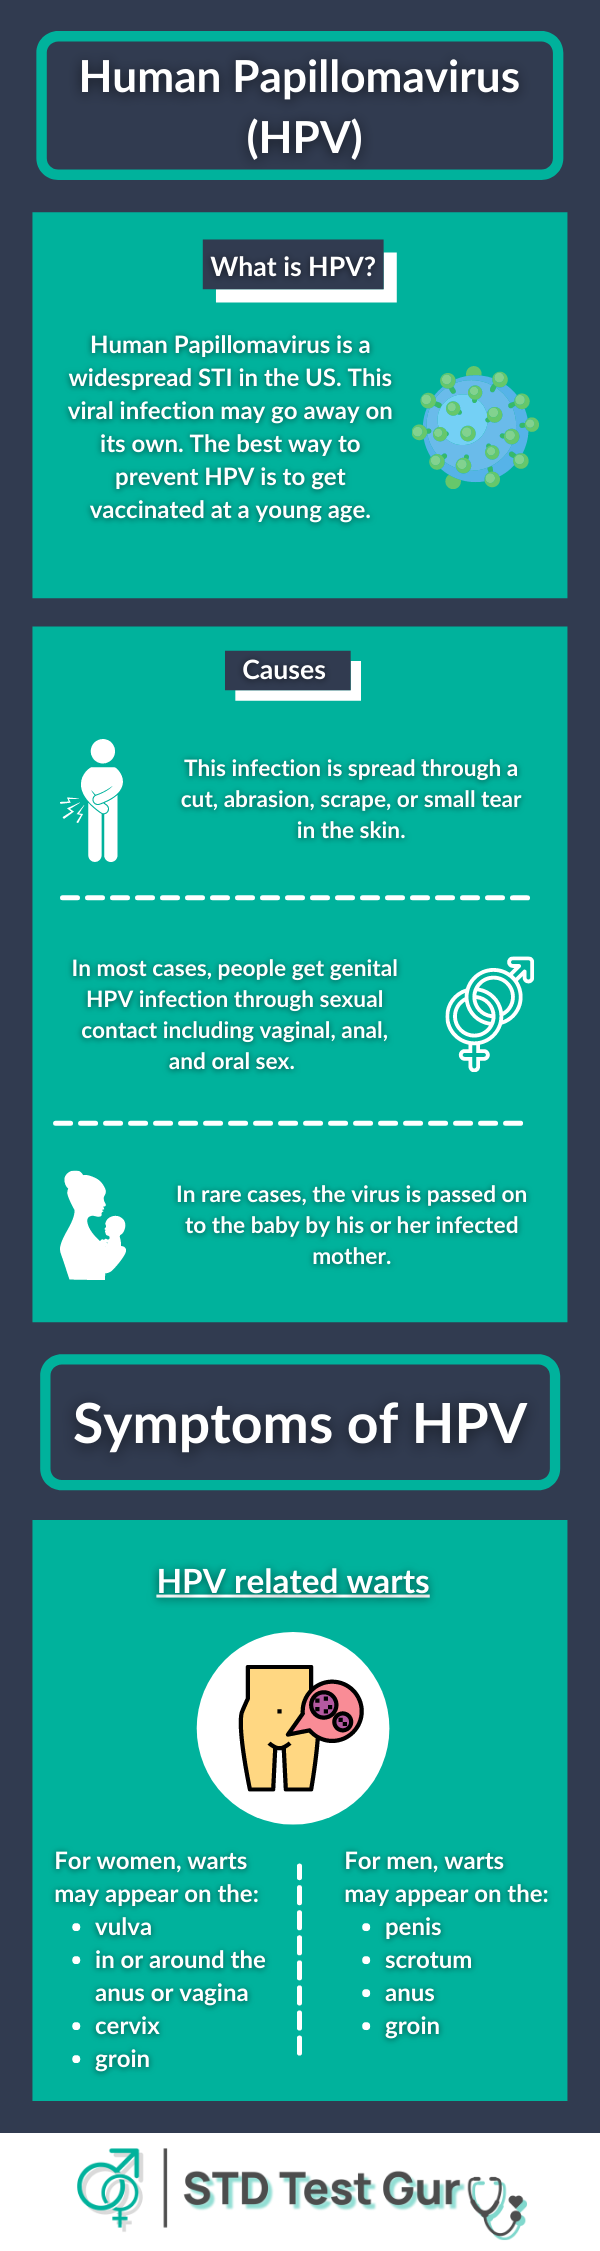 HPV: Causes and Symptoms